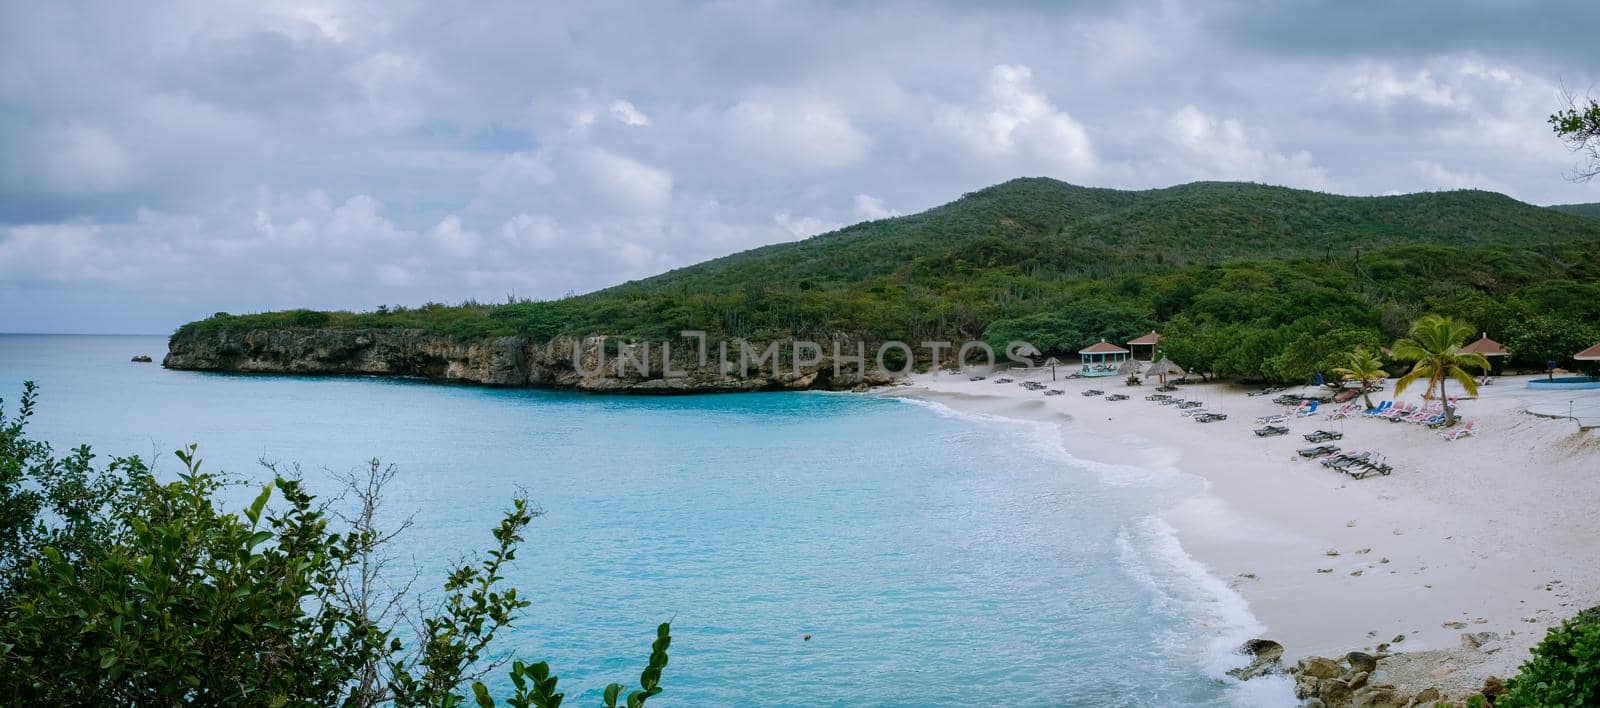 Grote knip beach Curacao, Island beach of Curacao in the Caribbean men and woman on vacation visit the beach by fokkebok